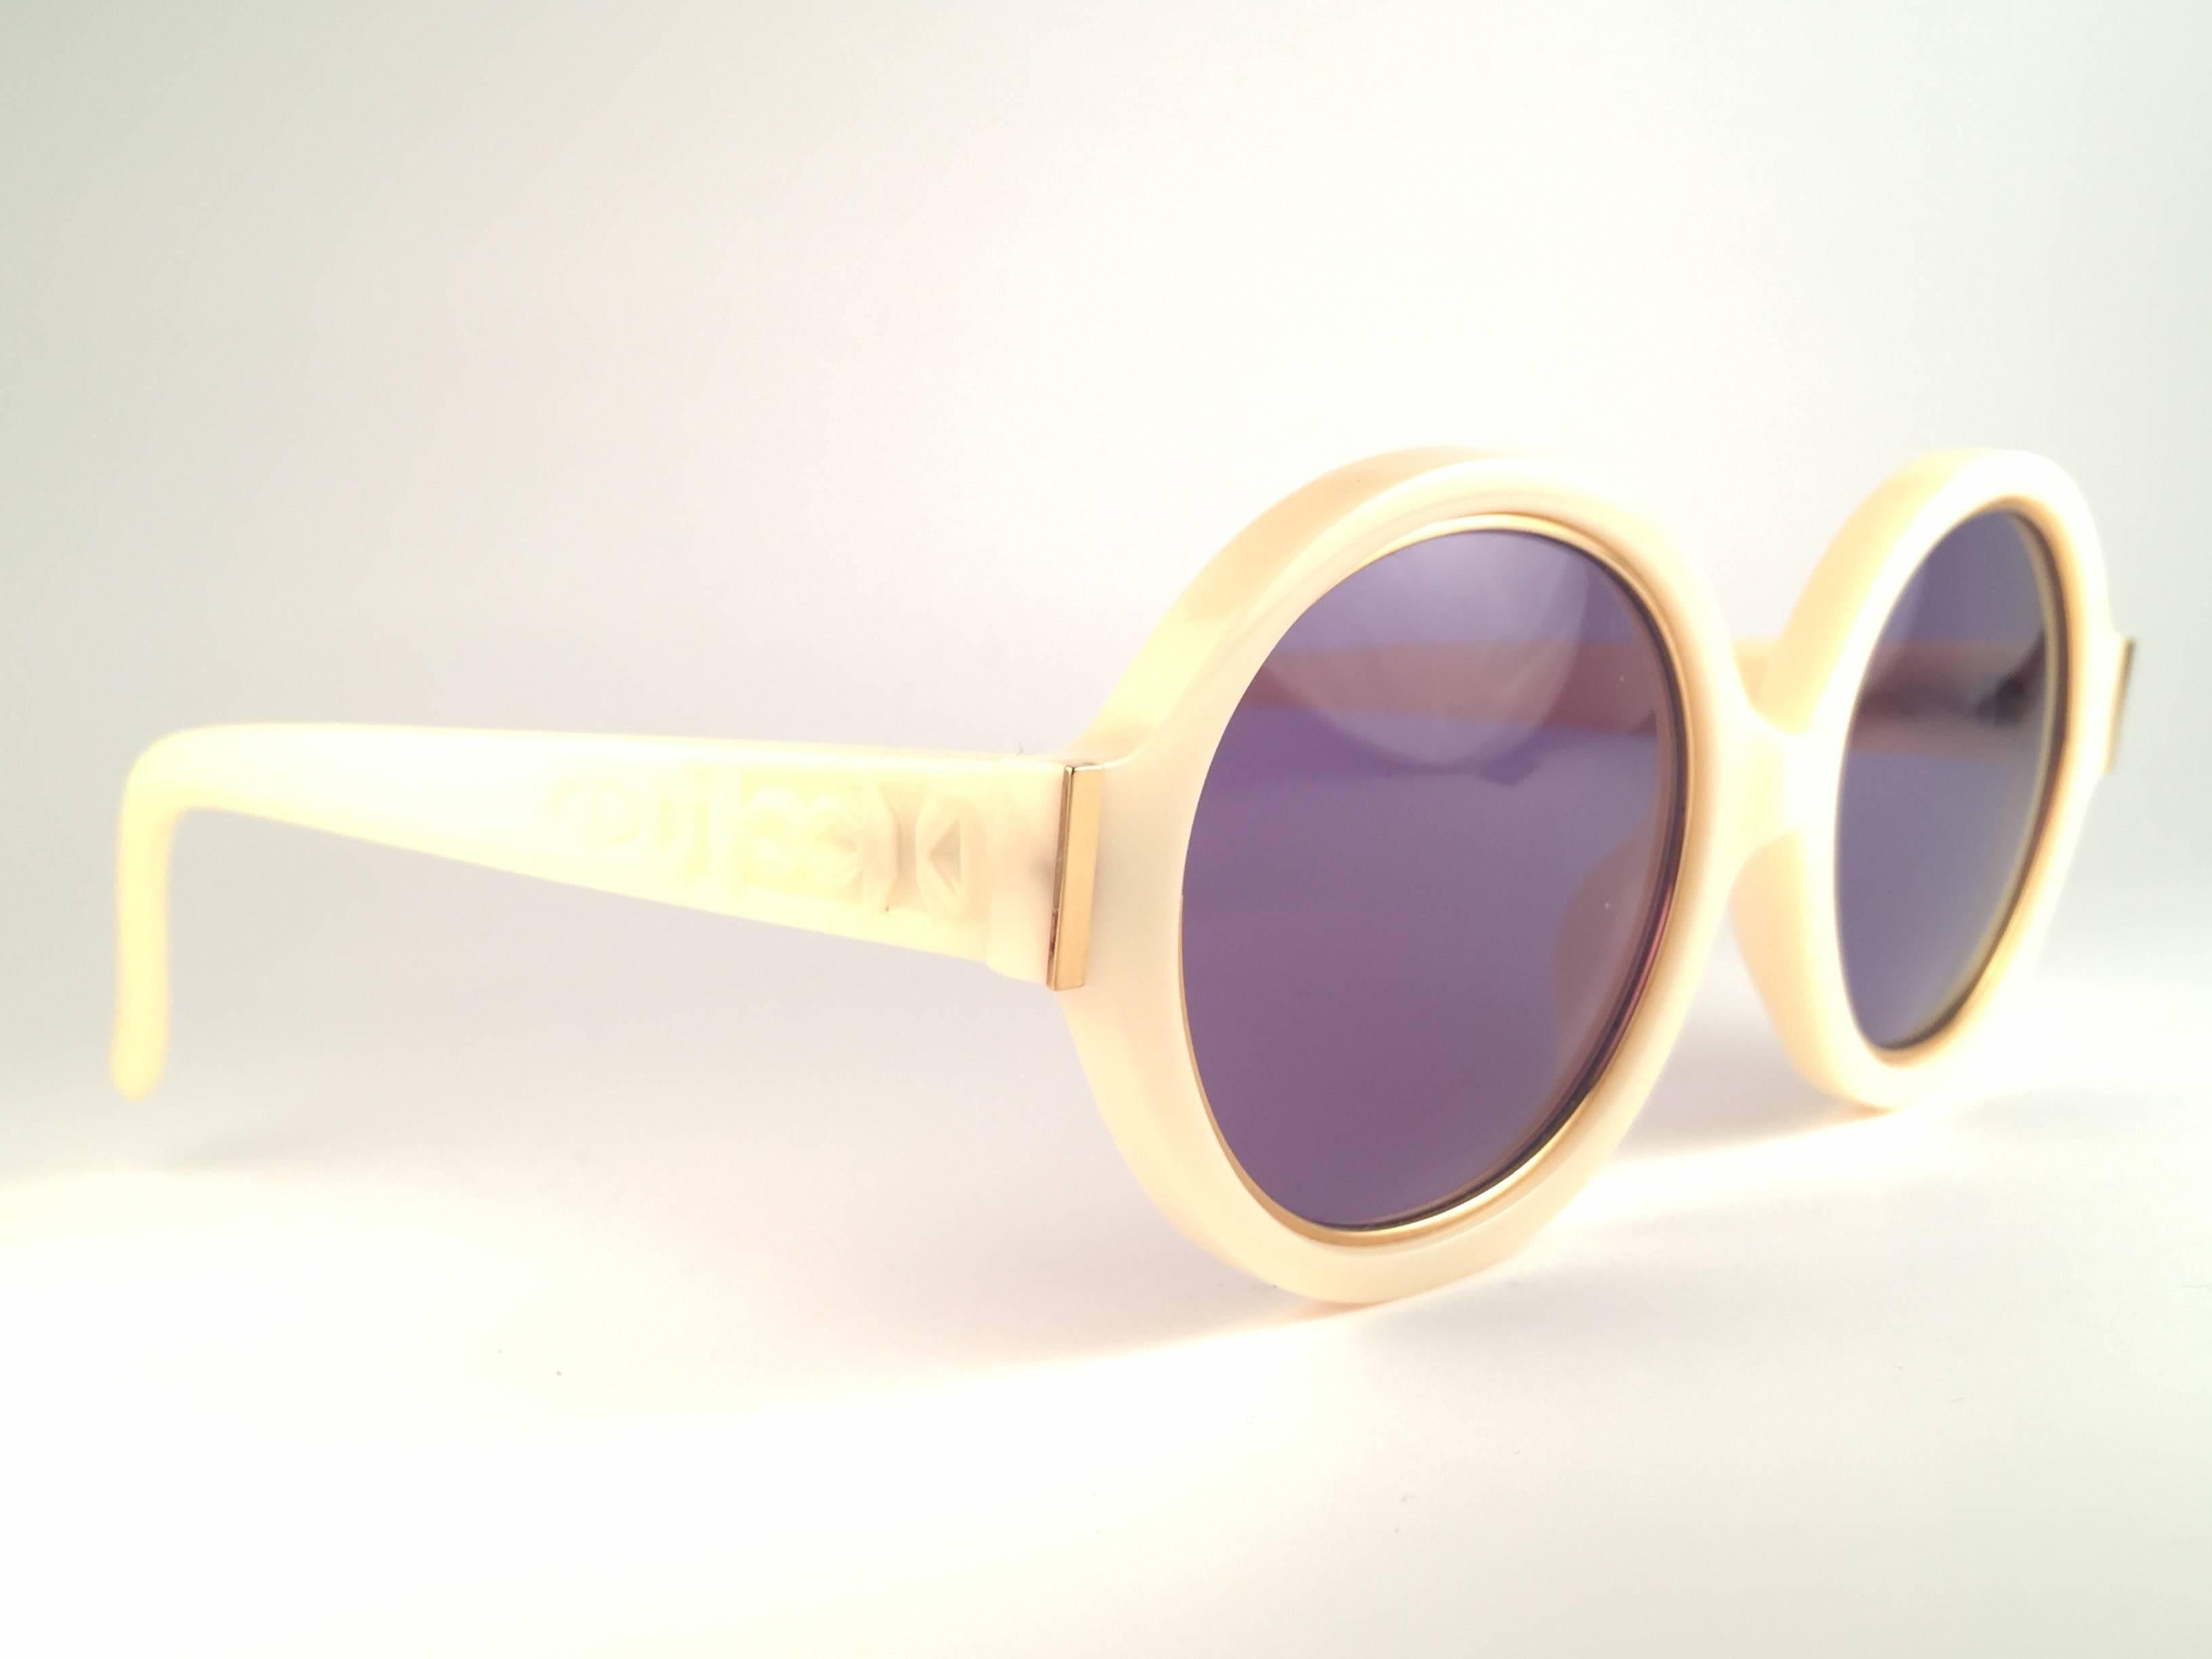 New Vintage Christian Dior 2446 70 Beige with gold inserts frame sporting spotless purple lenses. 

Made in Germany.
 
Produced and design in 1970's.

A collector’s piece!

New, never worn or displayed. Comes with its original silver Christian Dior